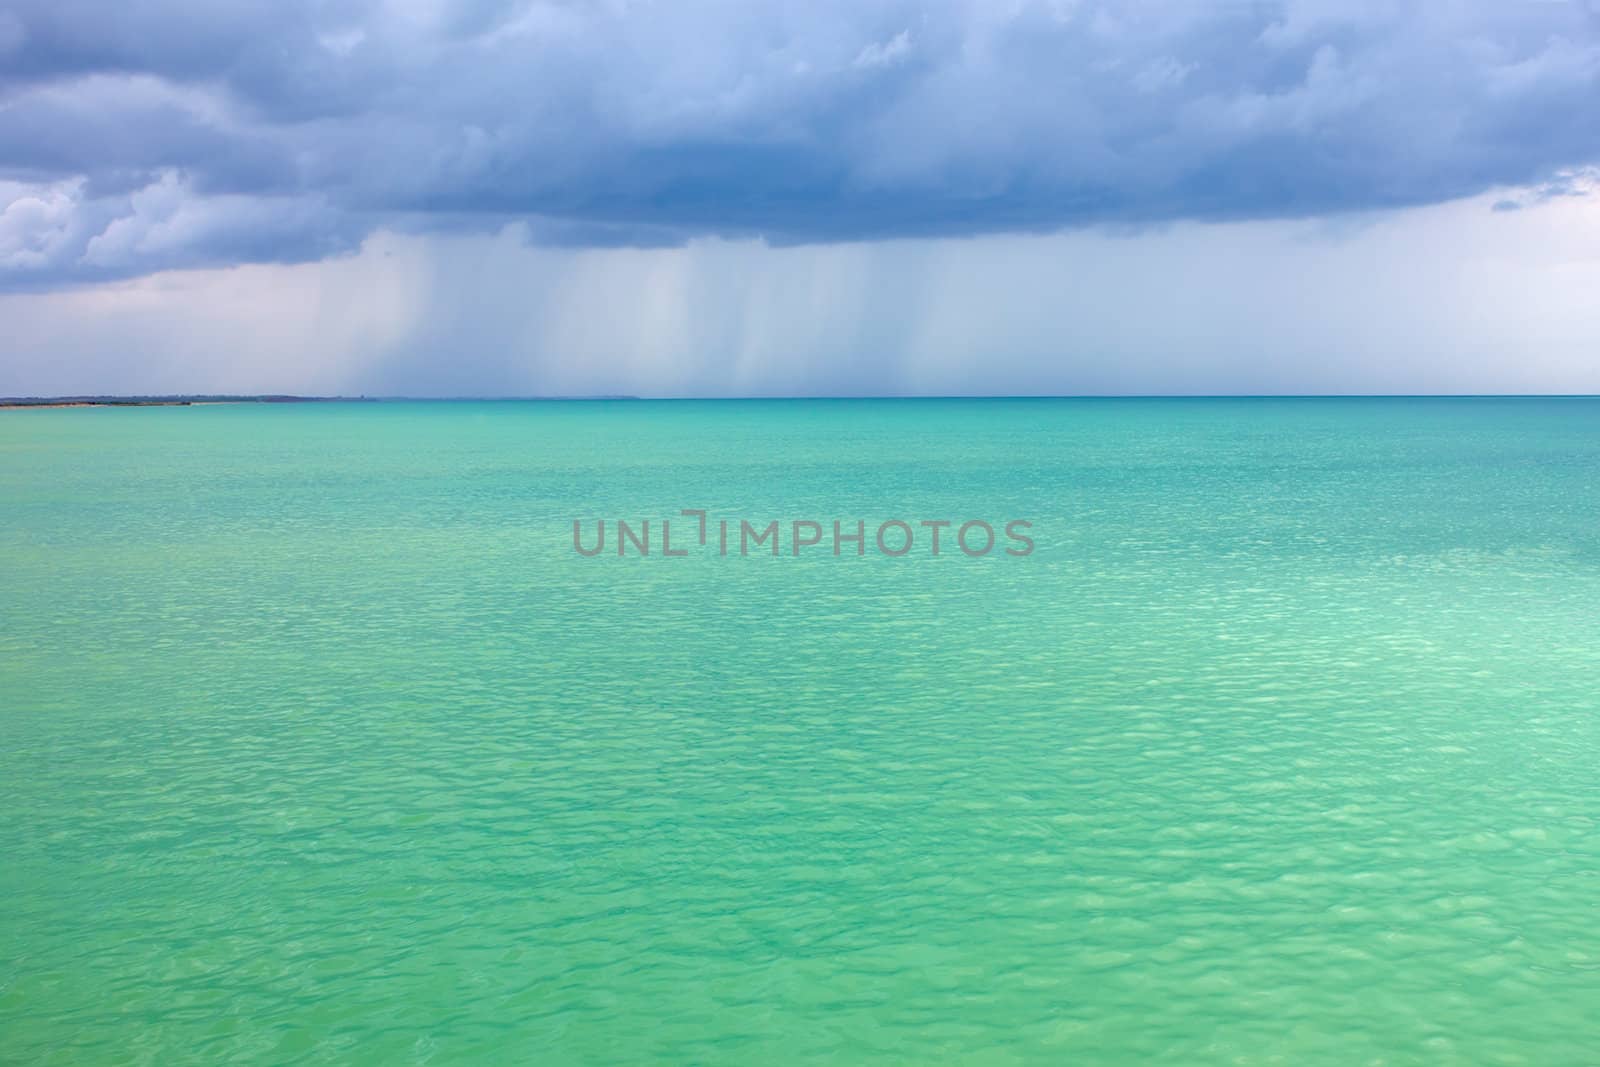 Storm clouds with rain over the sea with a turquoise surface illuminated by the sun